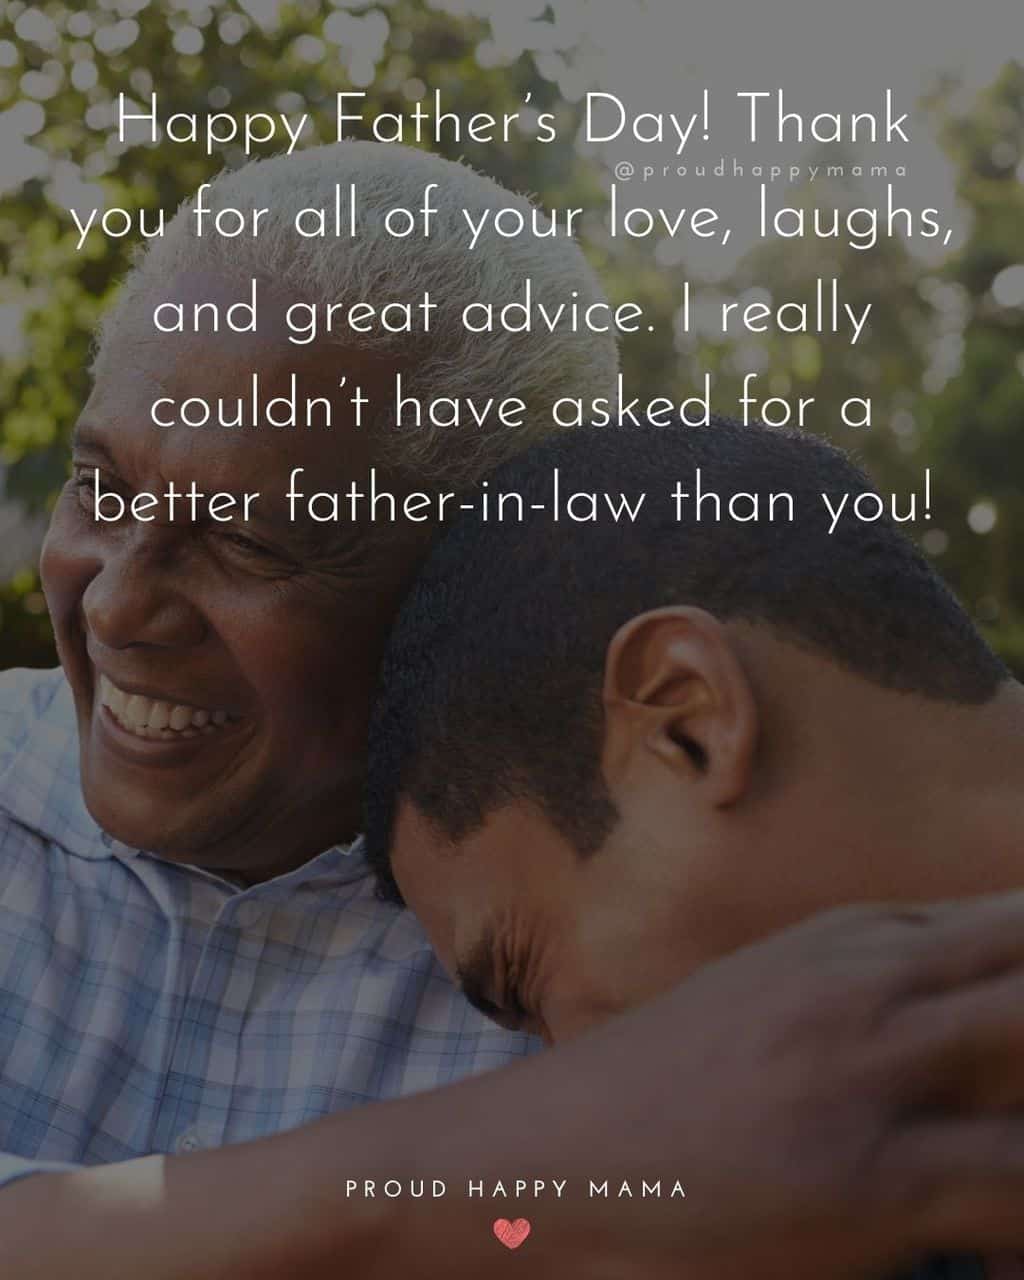 Happy Fathers Day Quotes For Father In Law - Happy Father’s Day! Thank you for all of your love, laughs, and great advice. I